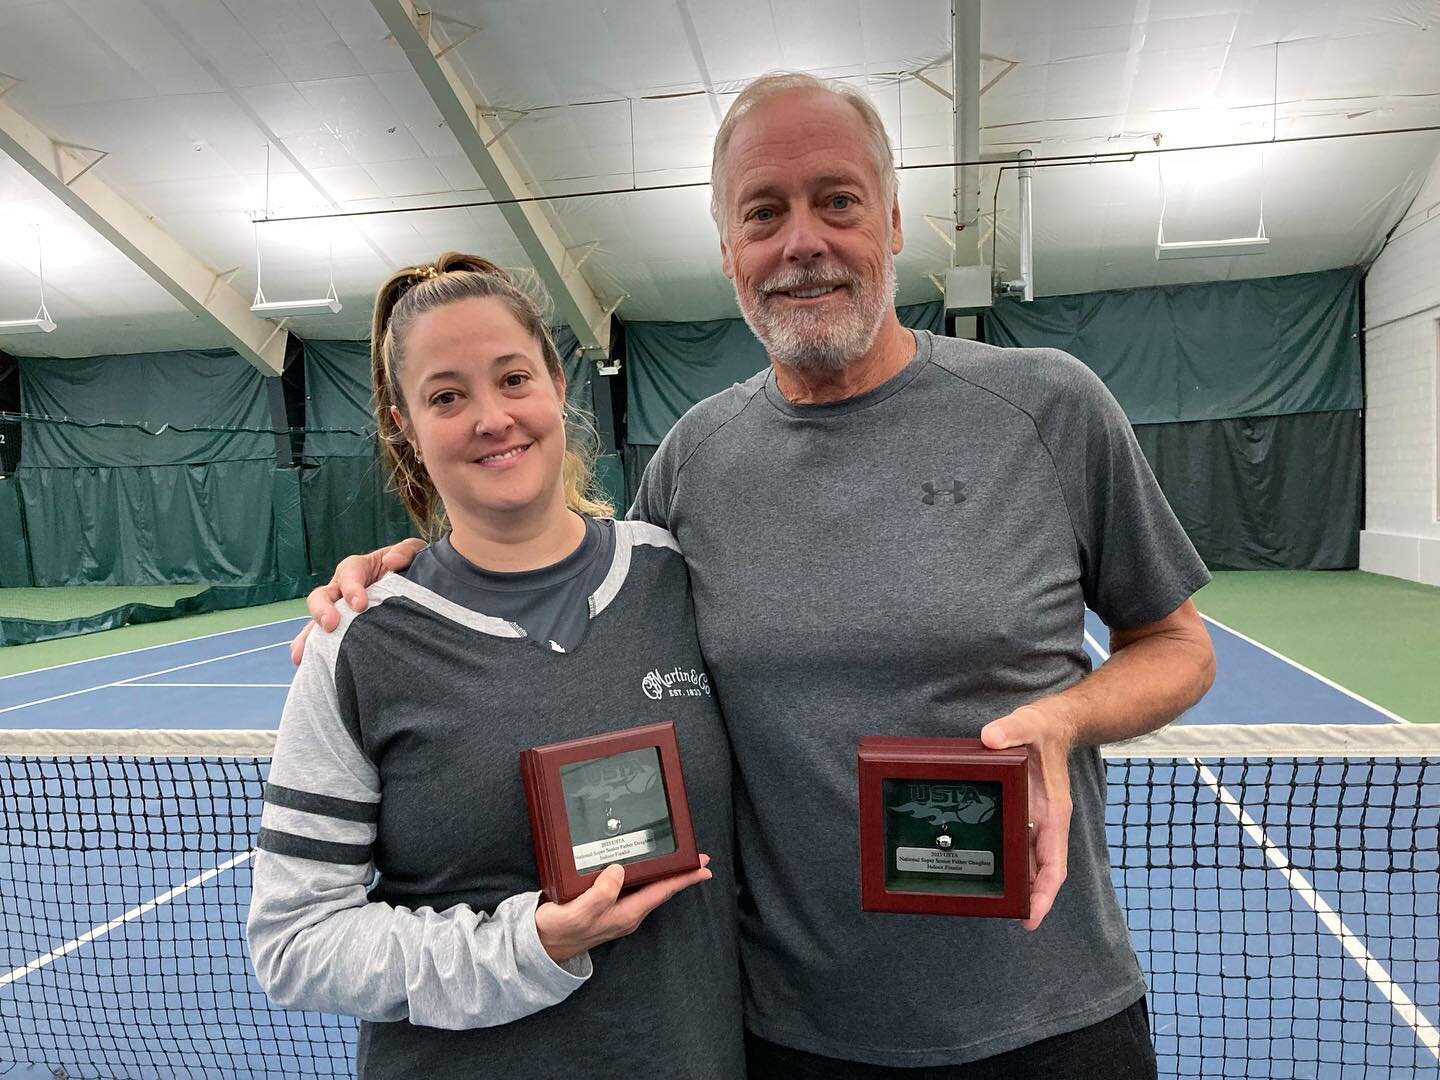 🎾🏆🎉 The Wins Keep Coming! 🎉🏆🎾

We are thrilled to extend our congratulations to our Club Manager and Coach, Liz Sherman, and her incredible father, Coach Bill Steege, Tennis Director Emeritus! They have made us proud by being USTA 2023 National